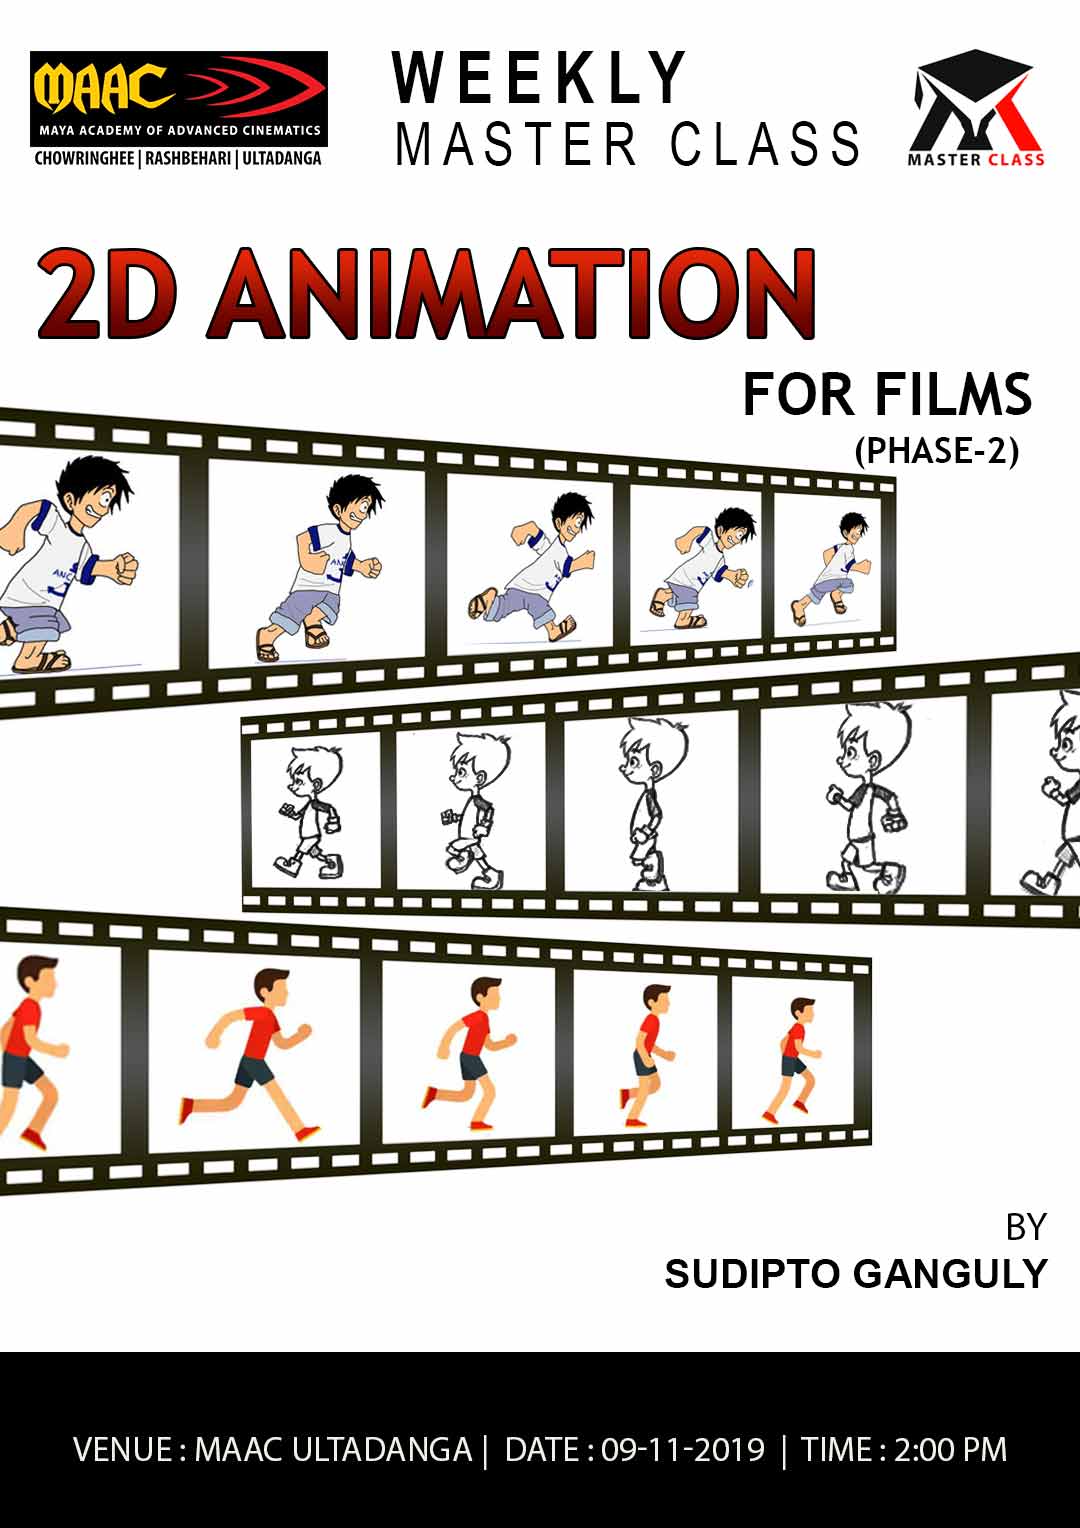 Weekly Master Class on 2D Animation Phase 2